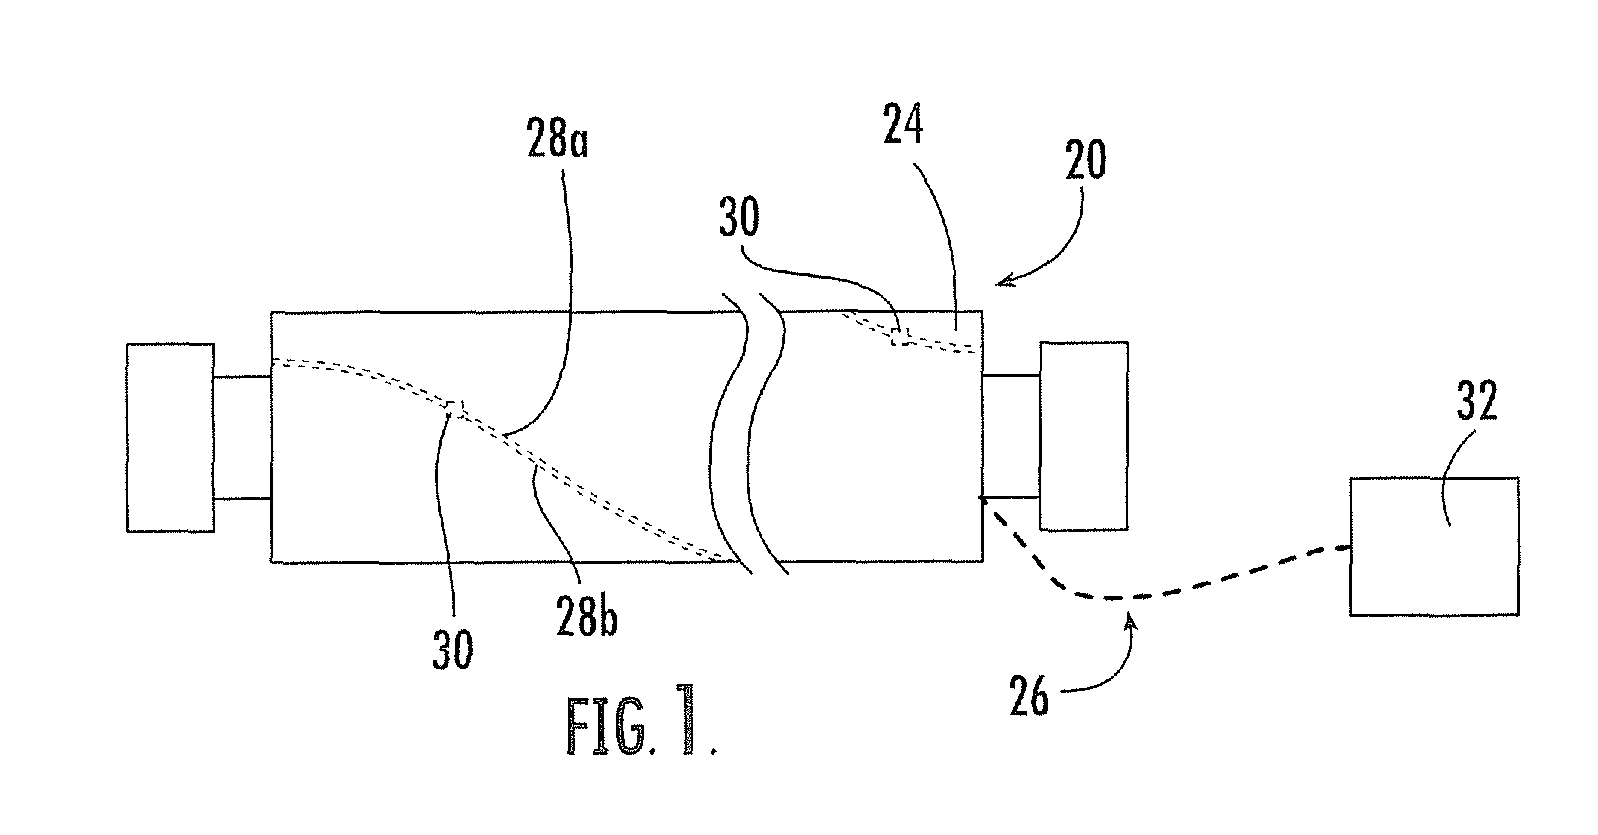 Industrial roll with sensors arranged to self-identify angular location